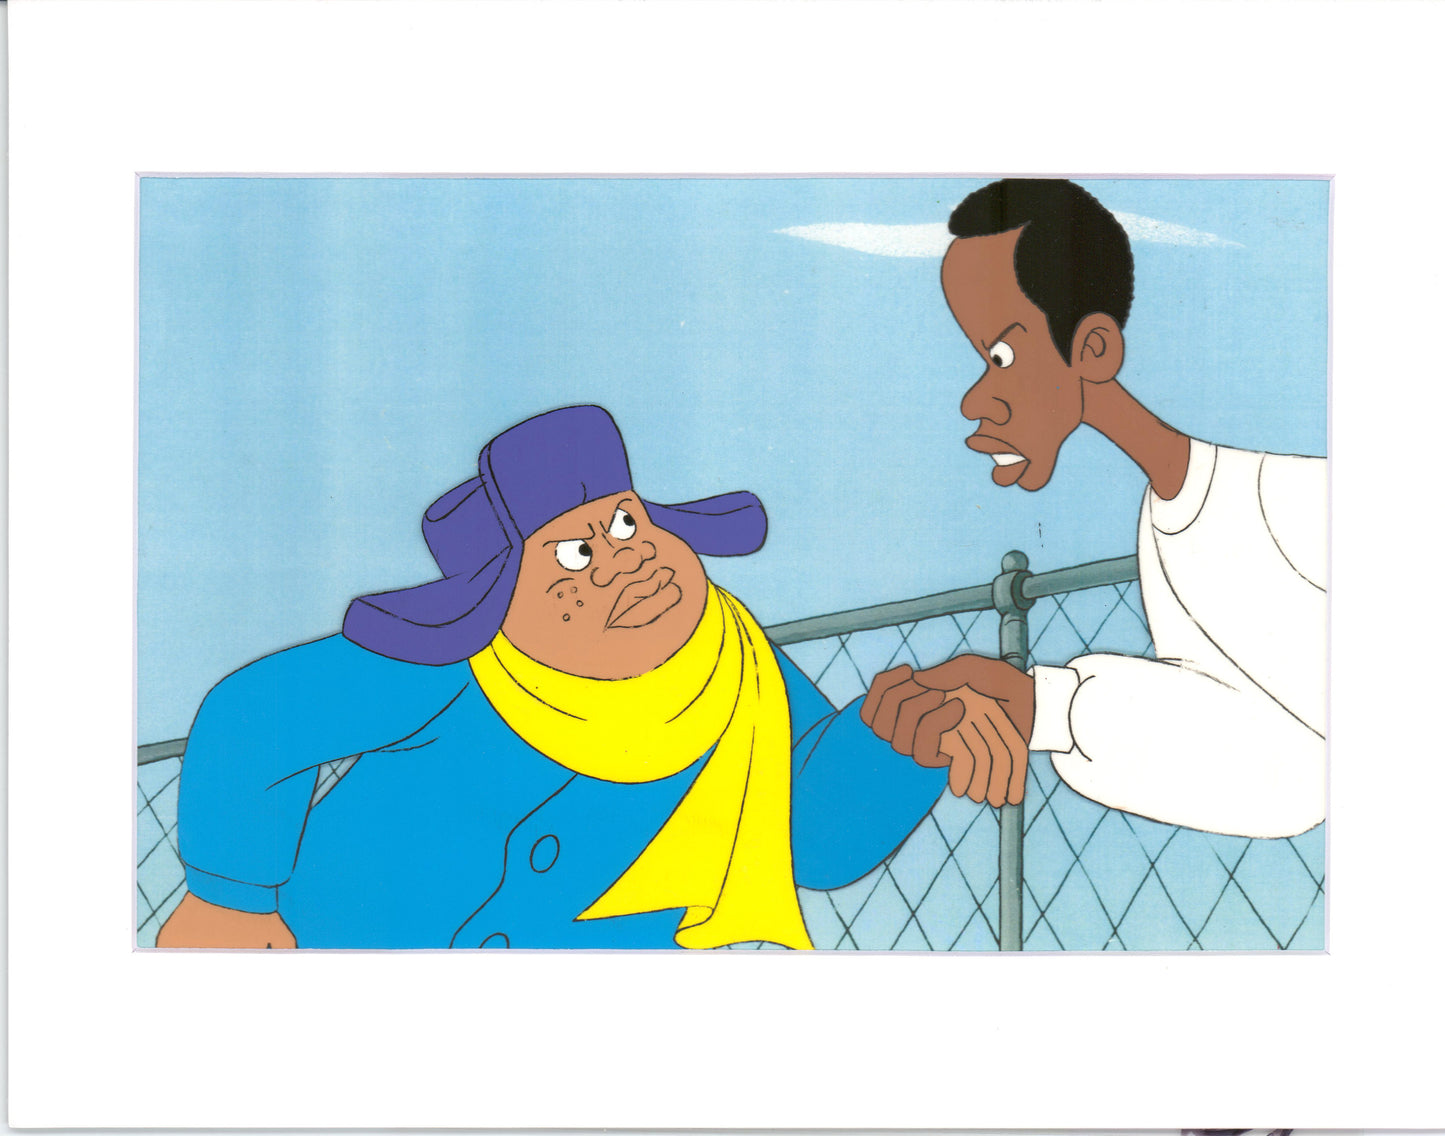 Fat Albert & the Gang Production Animation Cel Used to Make the Filmation Cartoon 1972-75 b2012